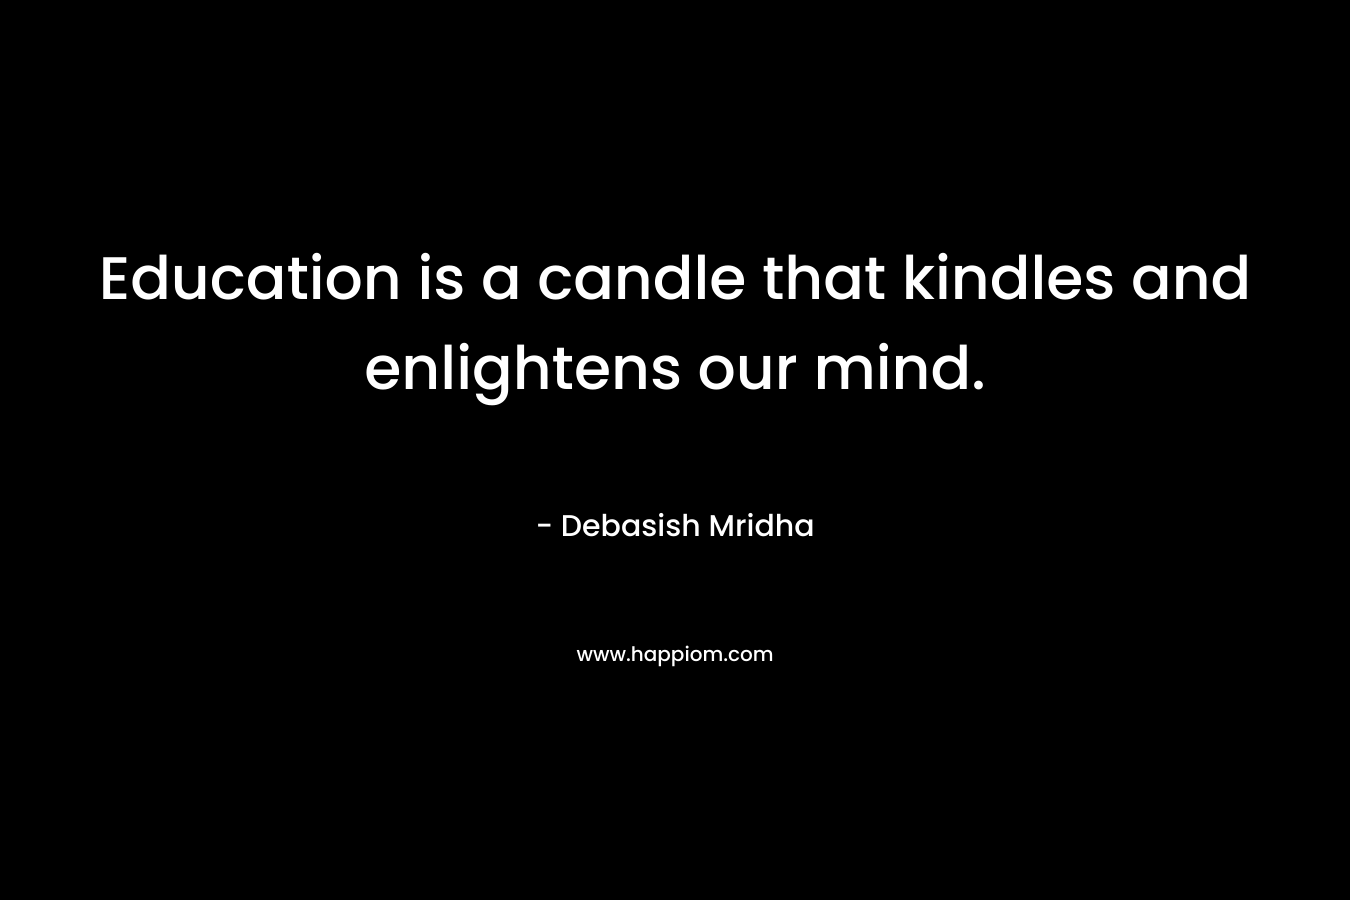 Education is a candle that kindles and enlightens our mind.